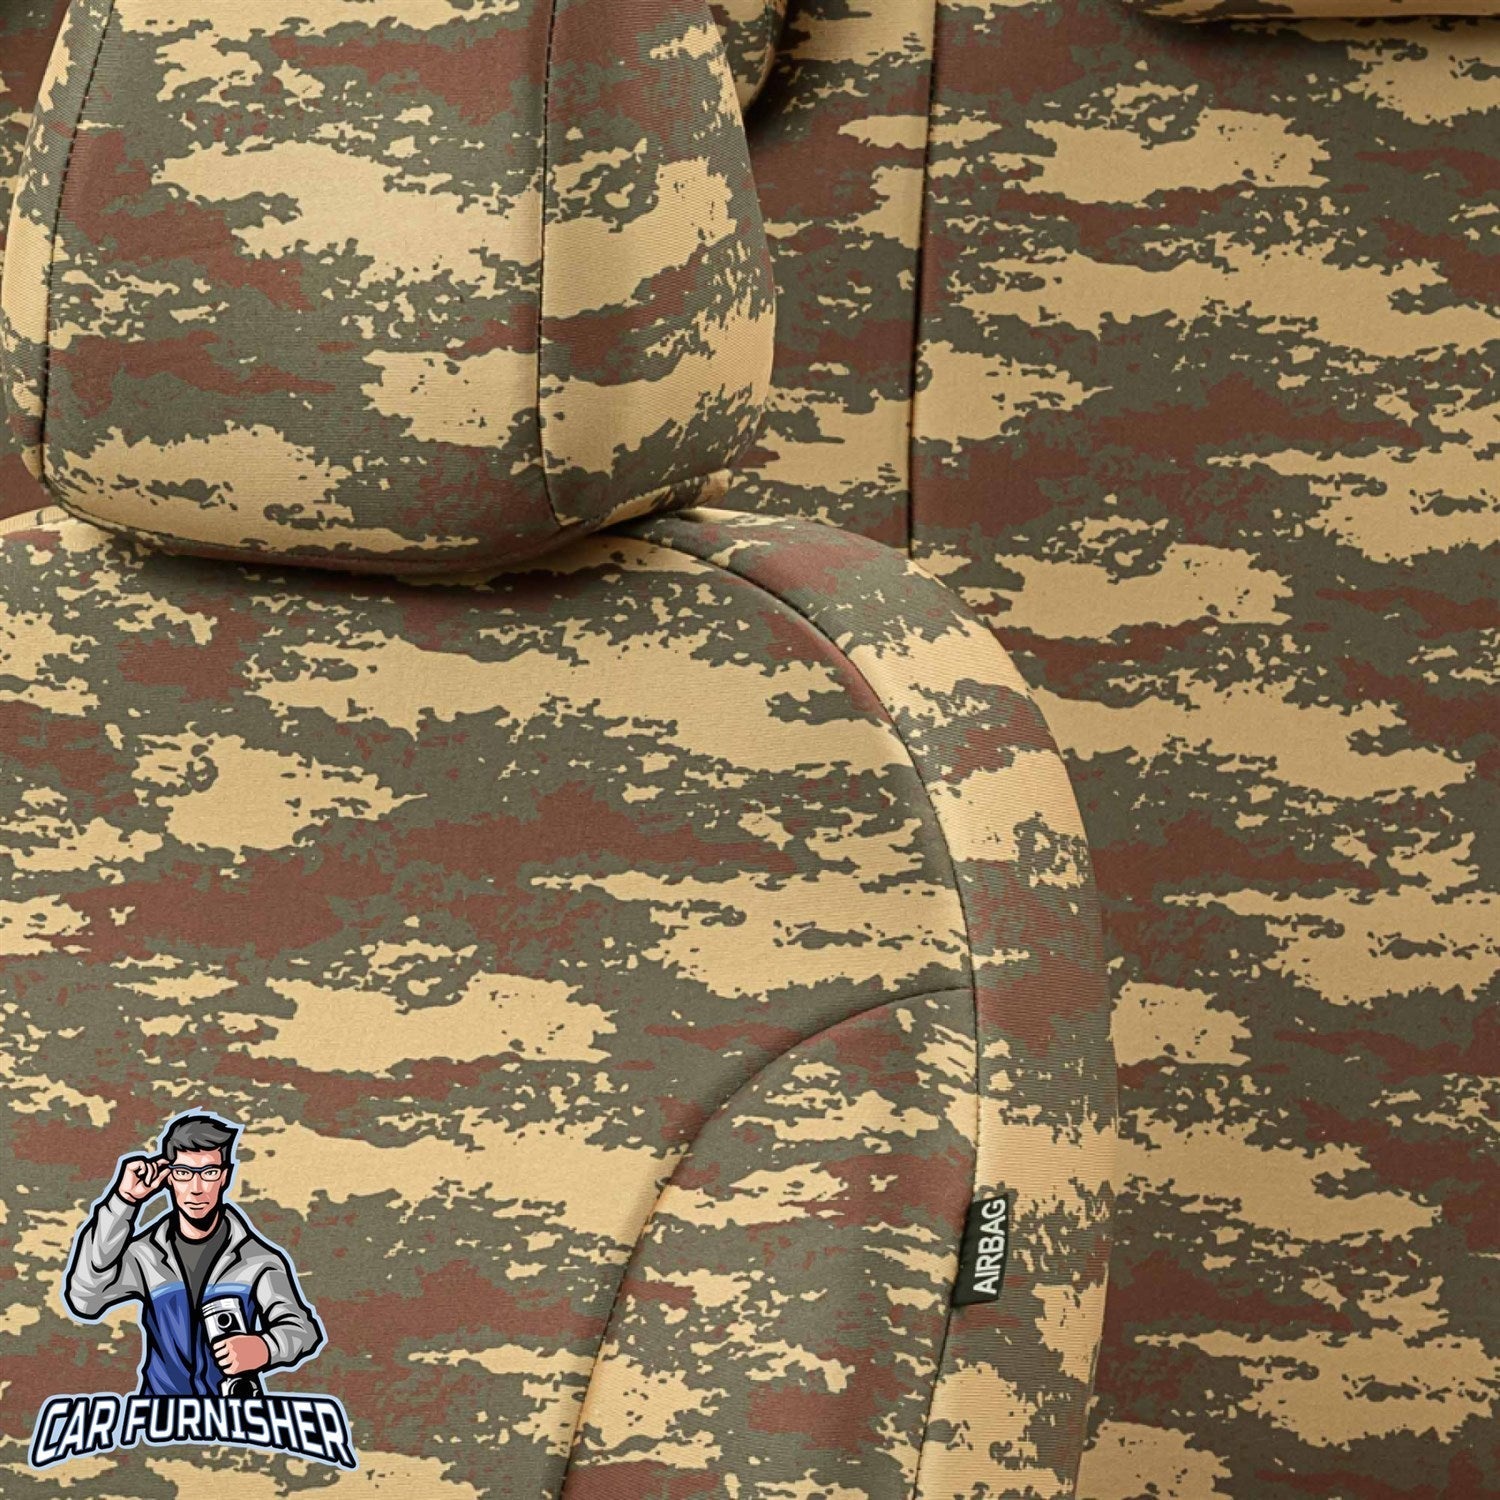 Ford Tourneo Courier Seat Covers Camouflage Waterproof Design Sierra Camo Waterproof Fabric